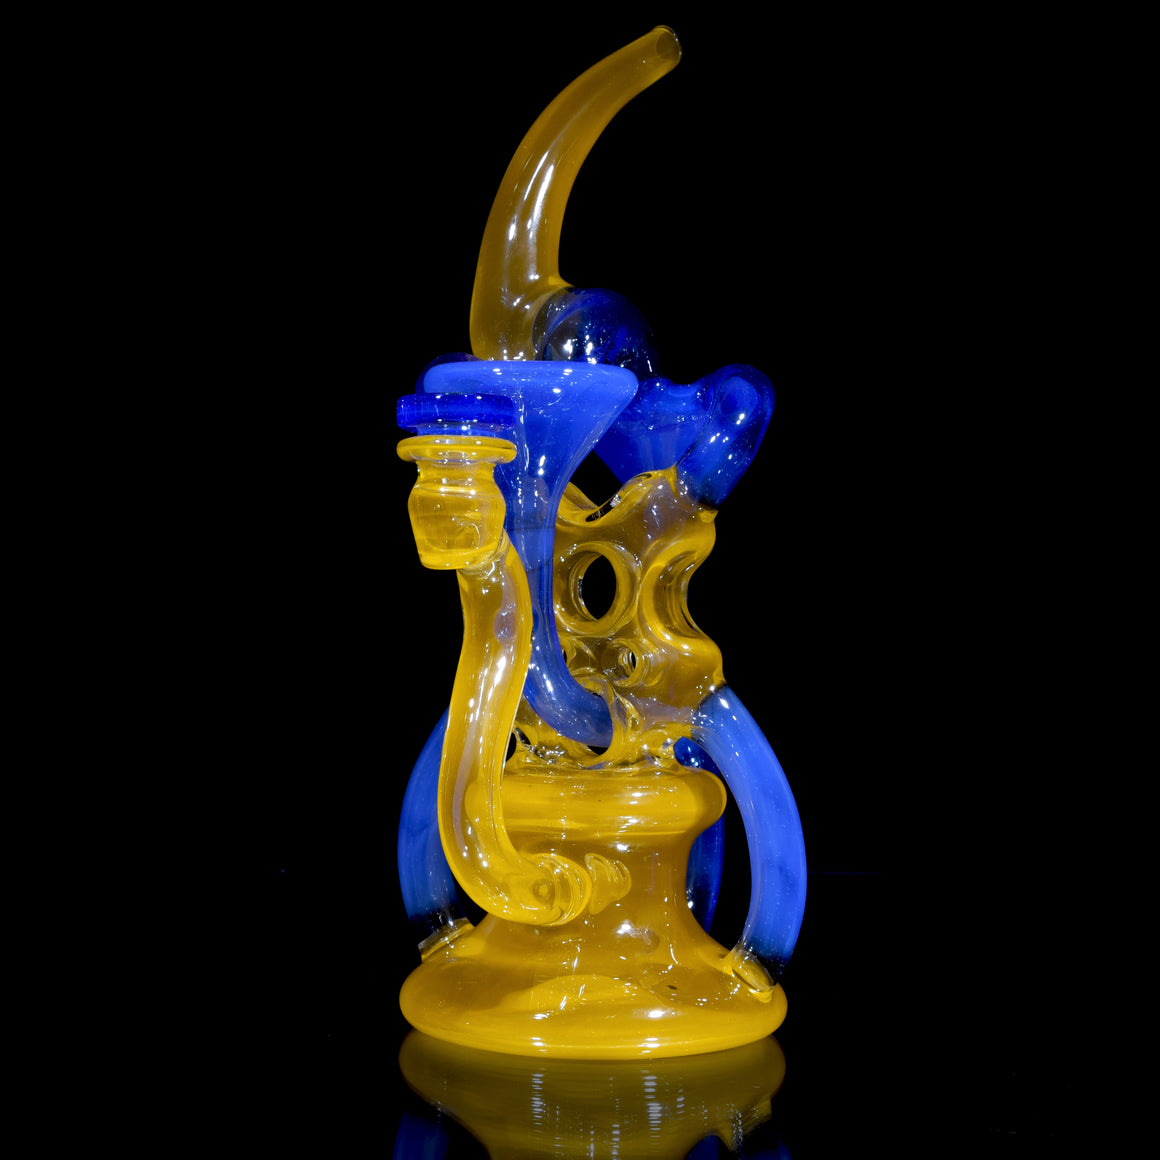 Tombstone Swiss Double-Cycler - Mystique/Rasta Gold - 10mm Female